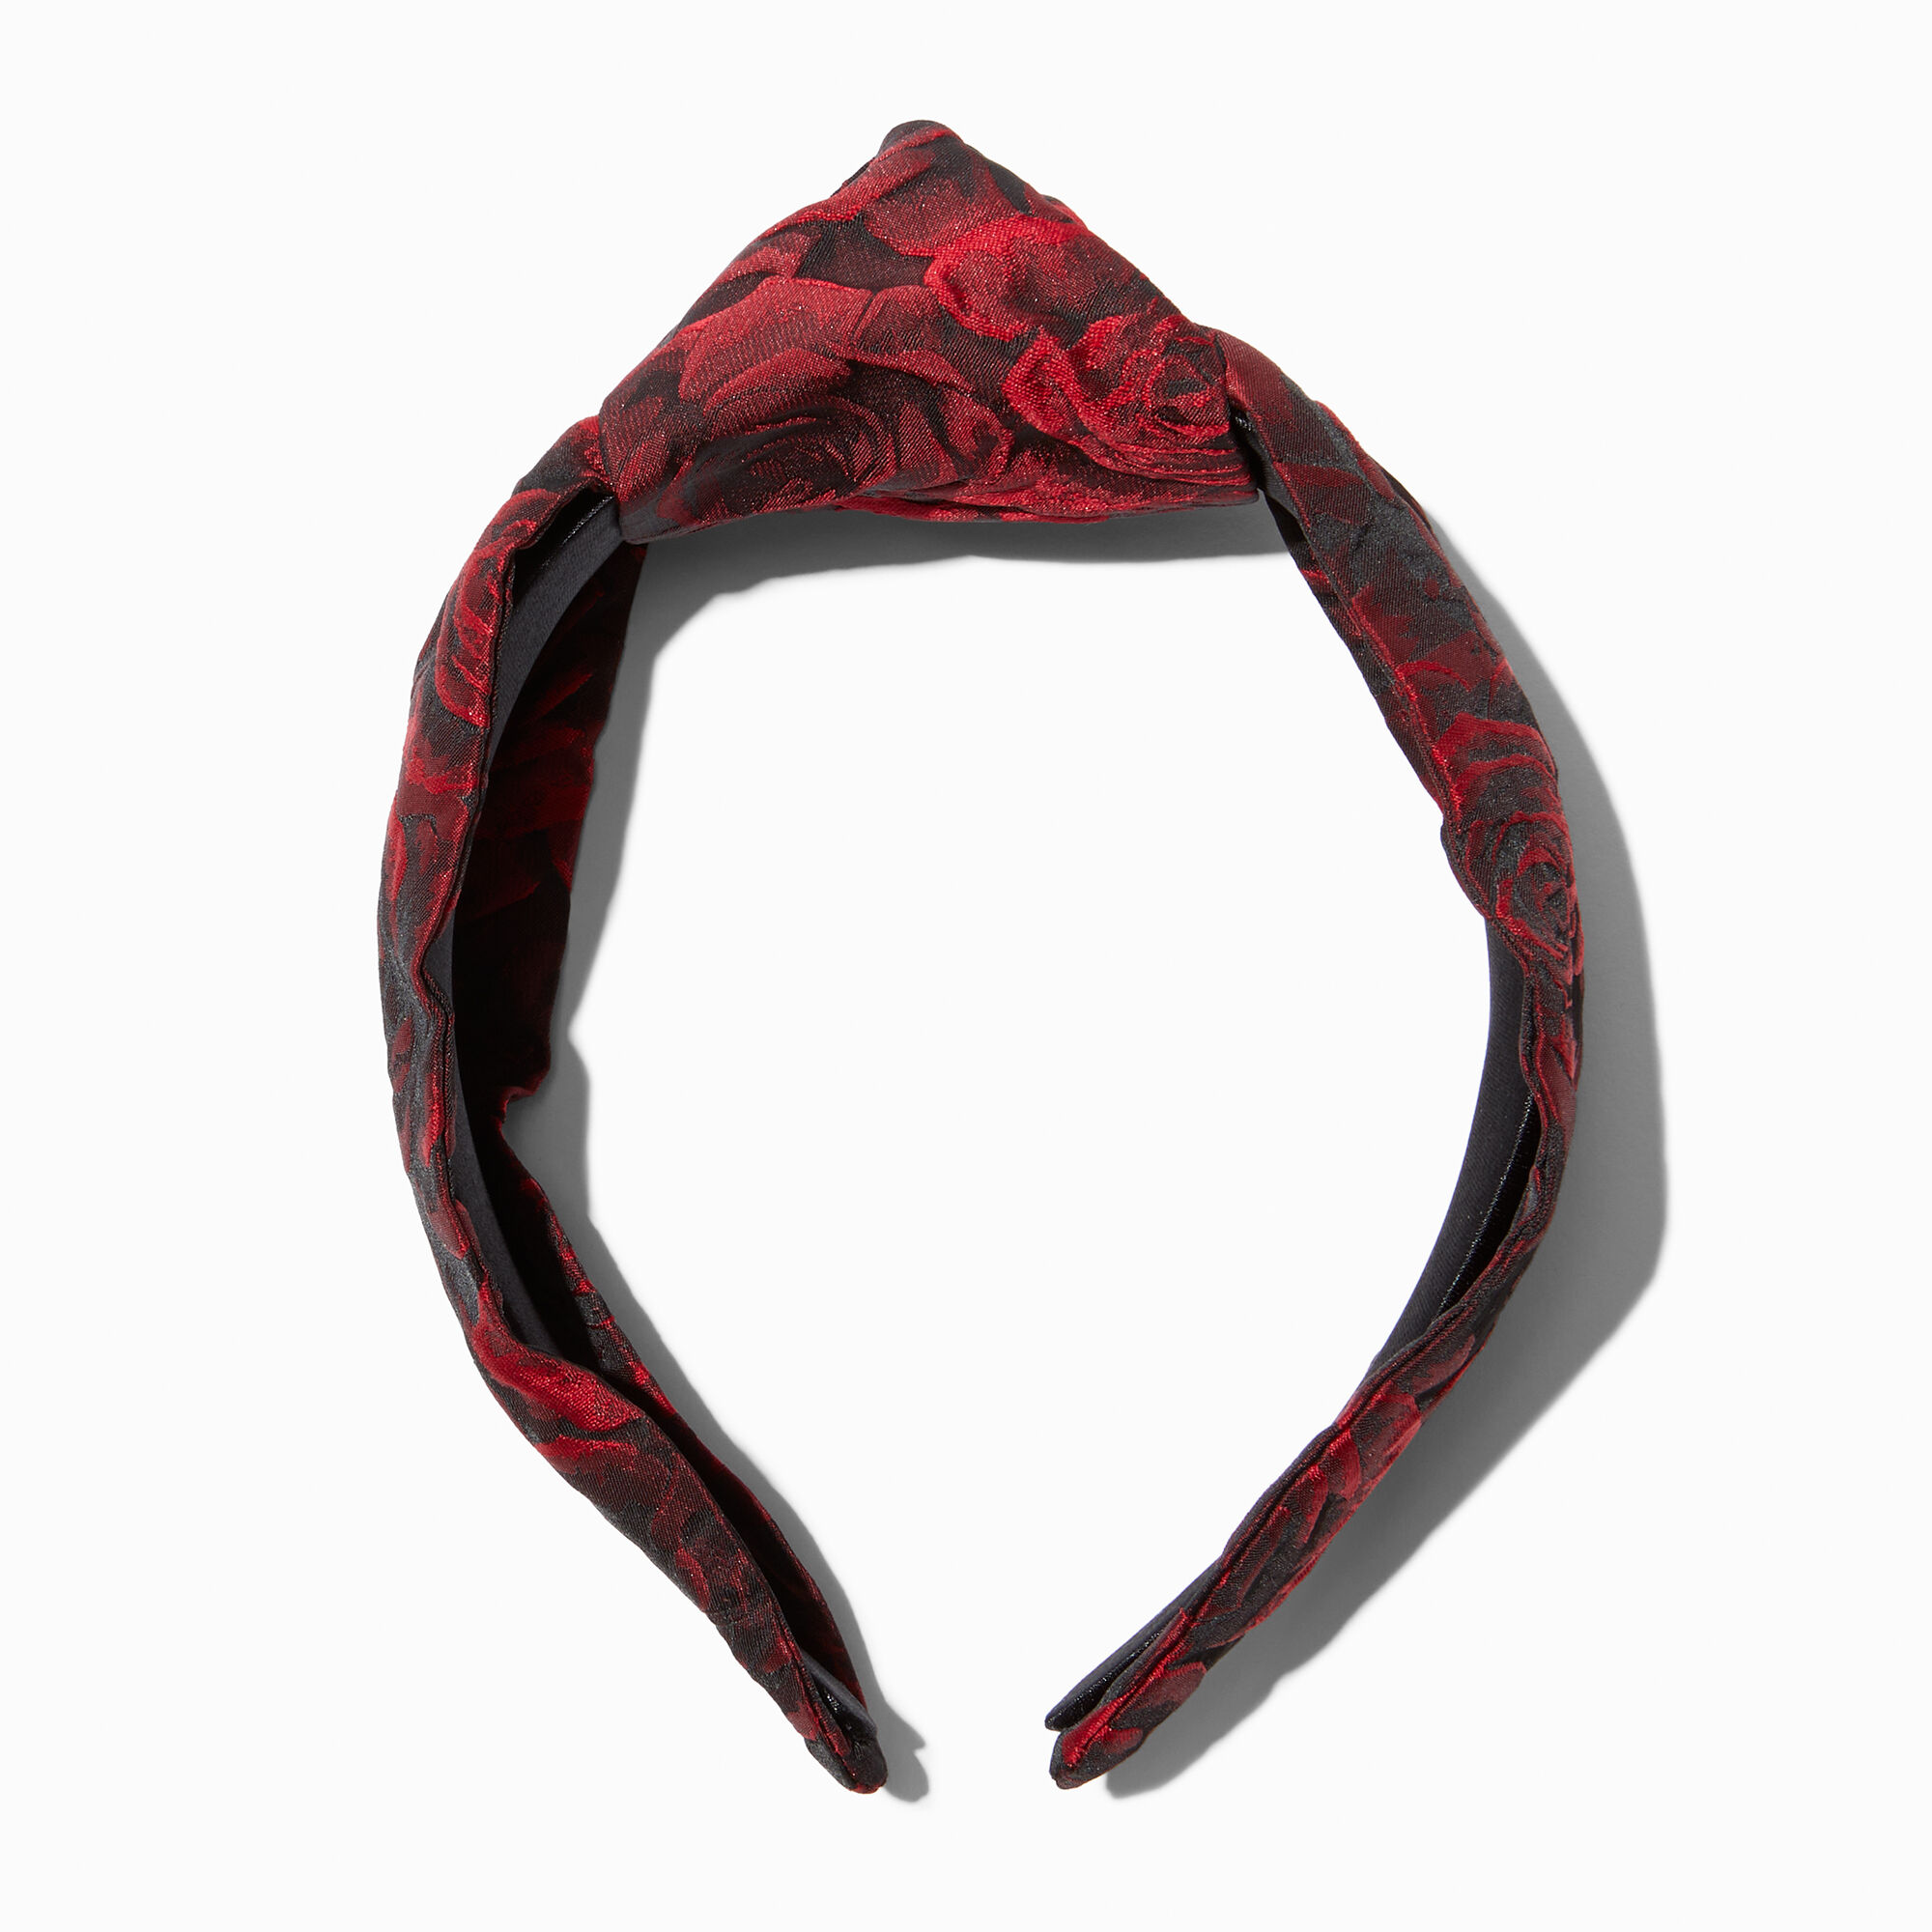 View Claires Floral Brocade Knotted Headband Red information